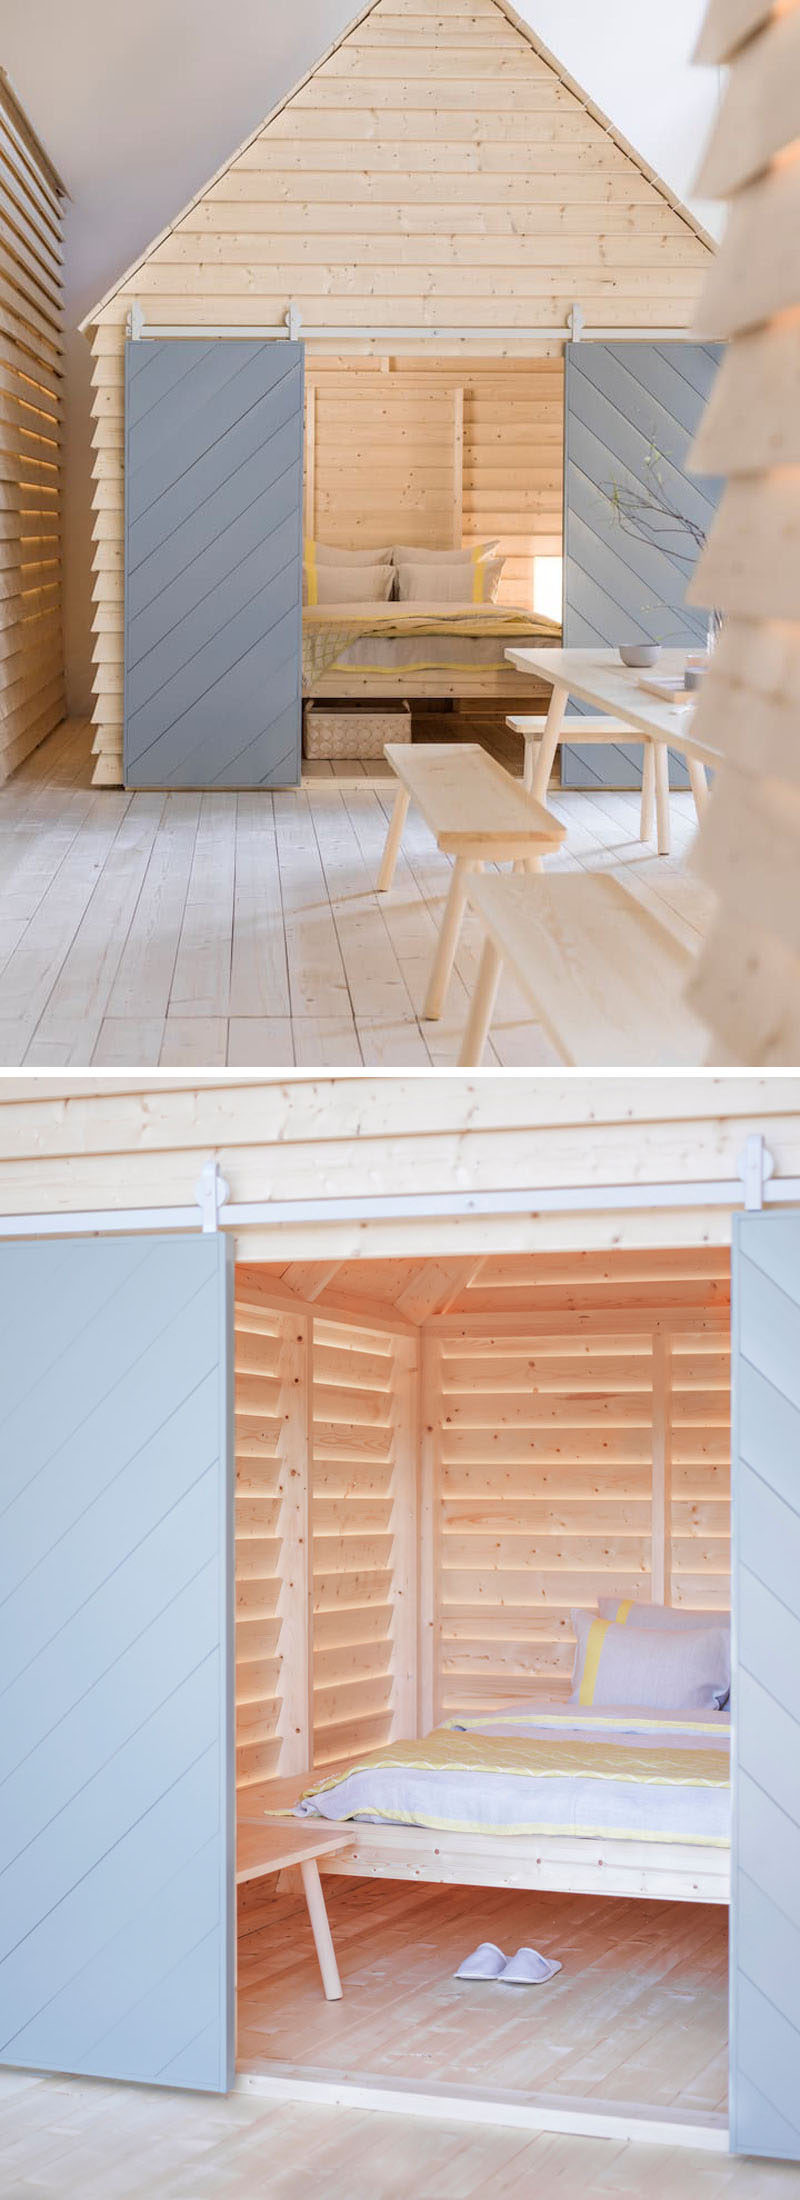 Designer Linda Bergroth has recently revealed KOTI - a series of cottages inside the Finnish Institute in Paris that will be on display as both an exhibit as well as a place for guests who are looking for a unique experience that celebrates the simplicity of Finnish cottage life.